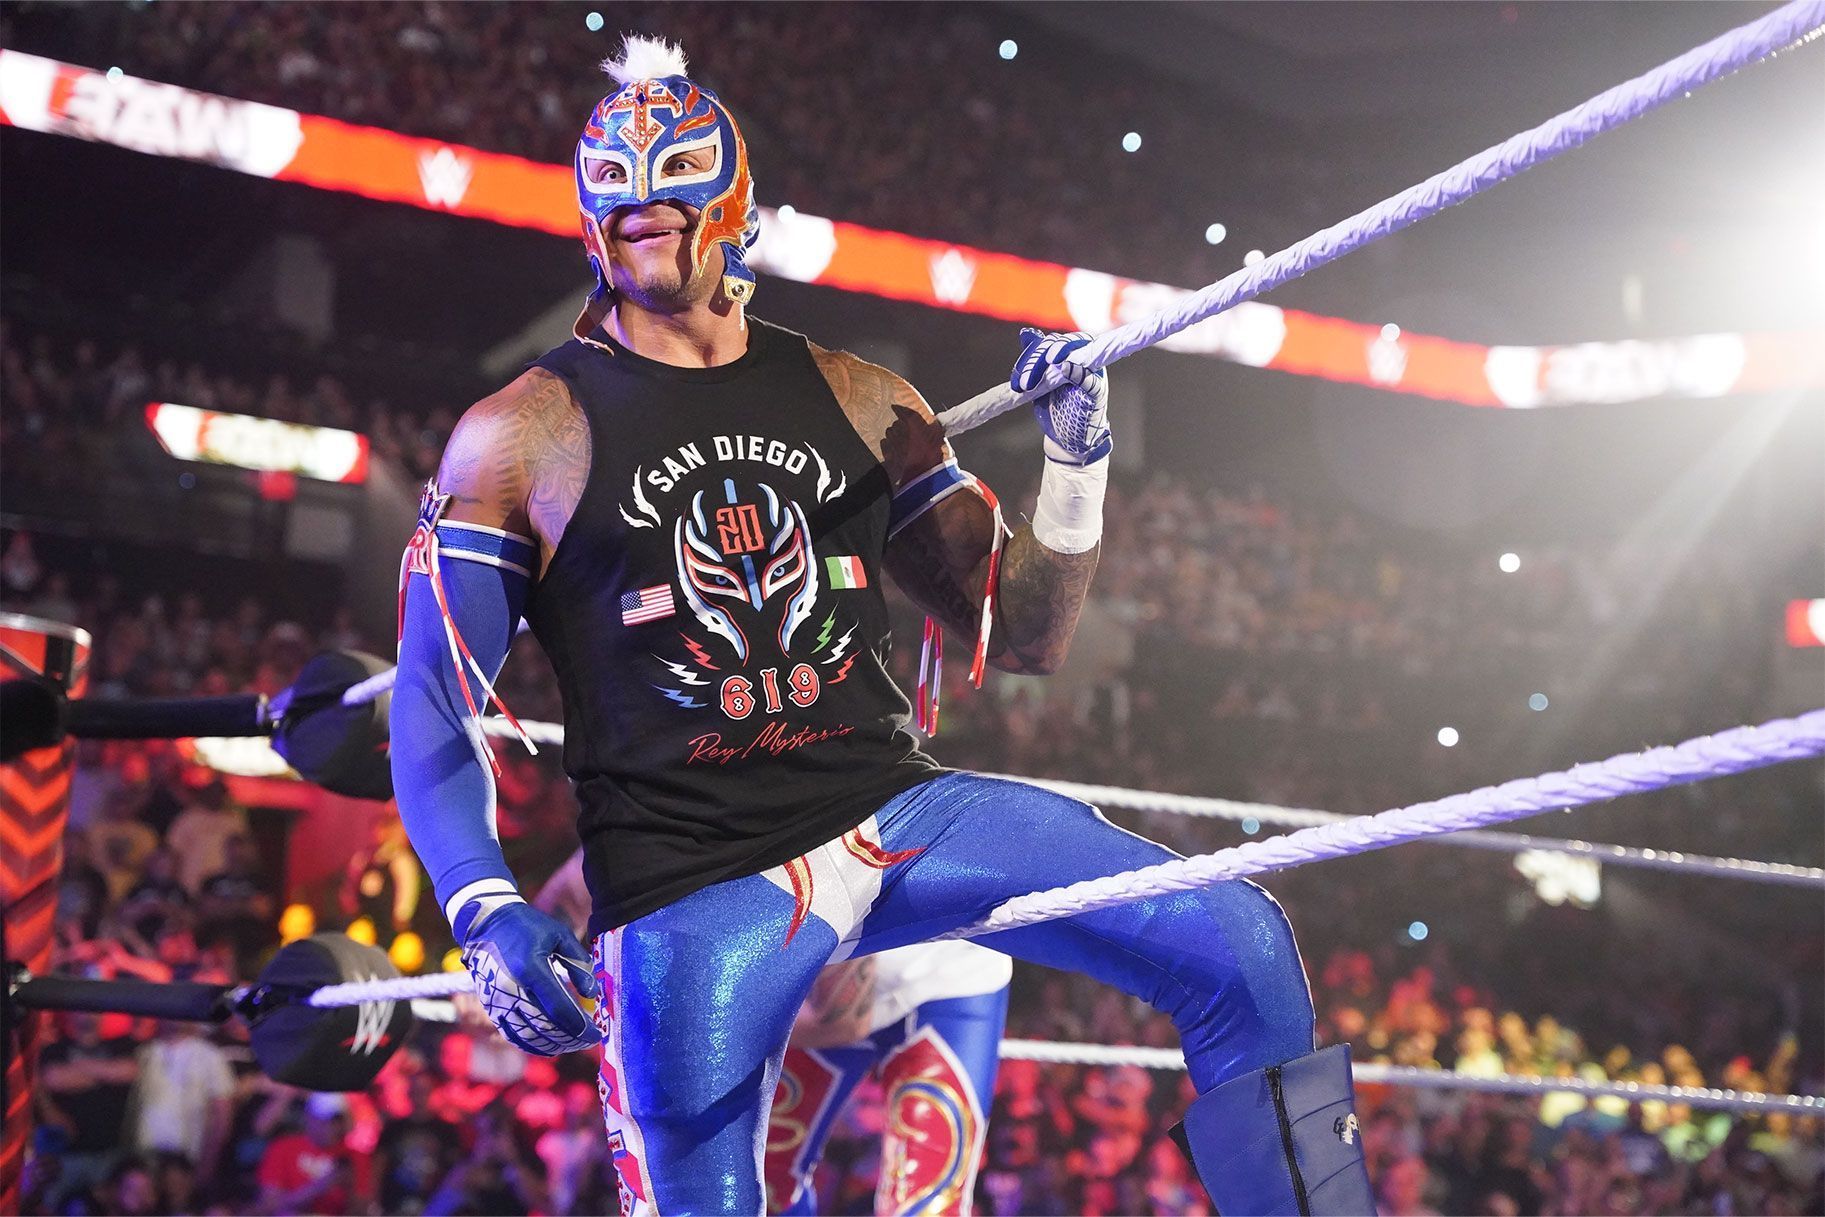 Rey Mysterio has been married for almost three decades